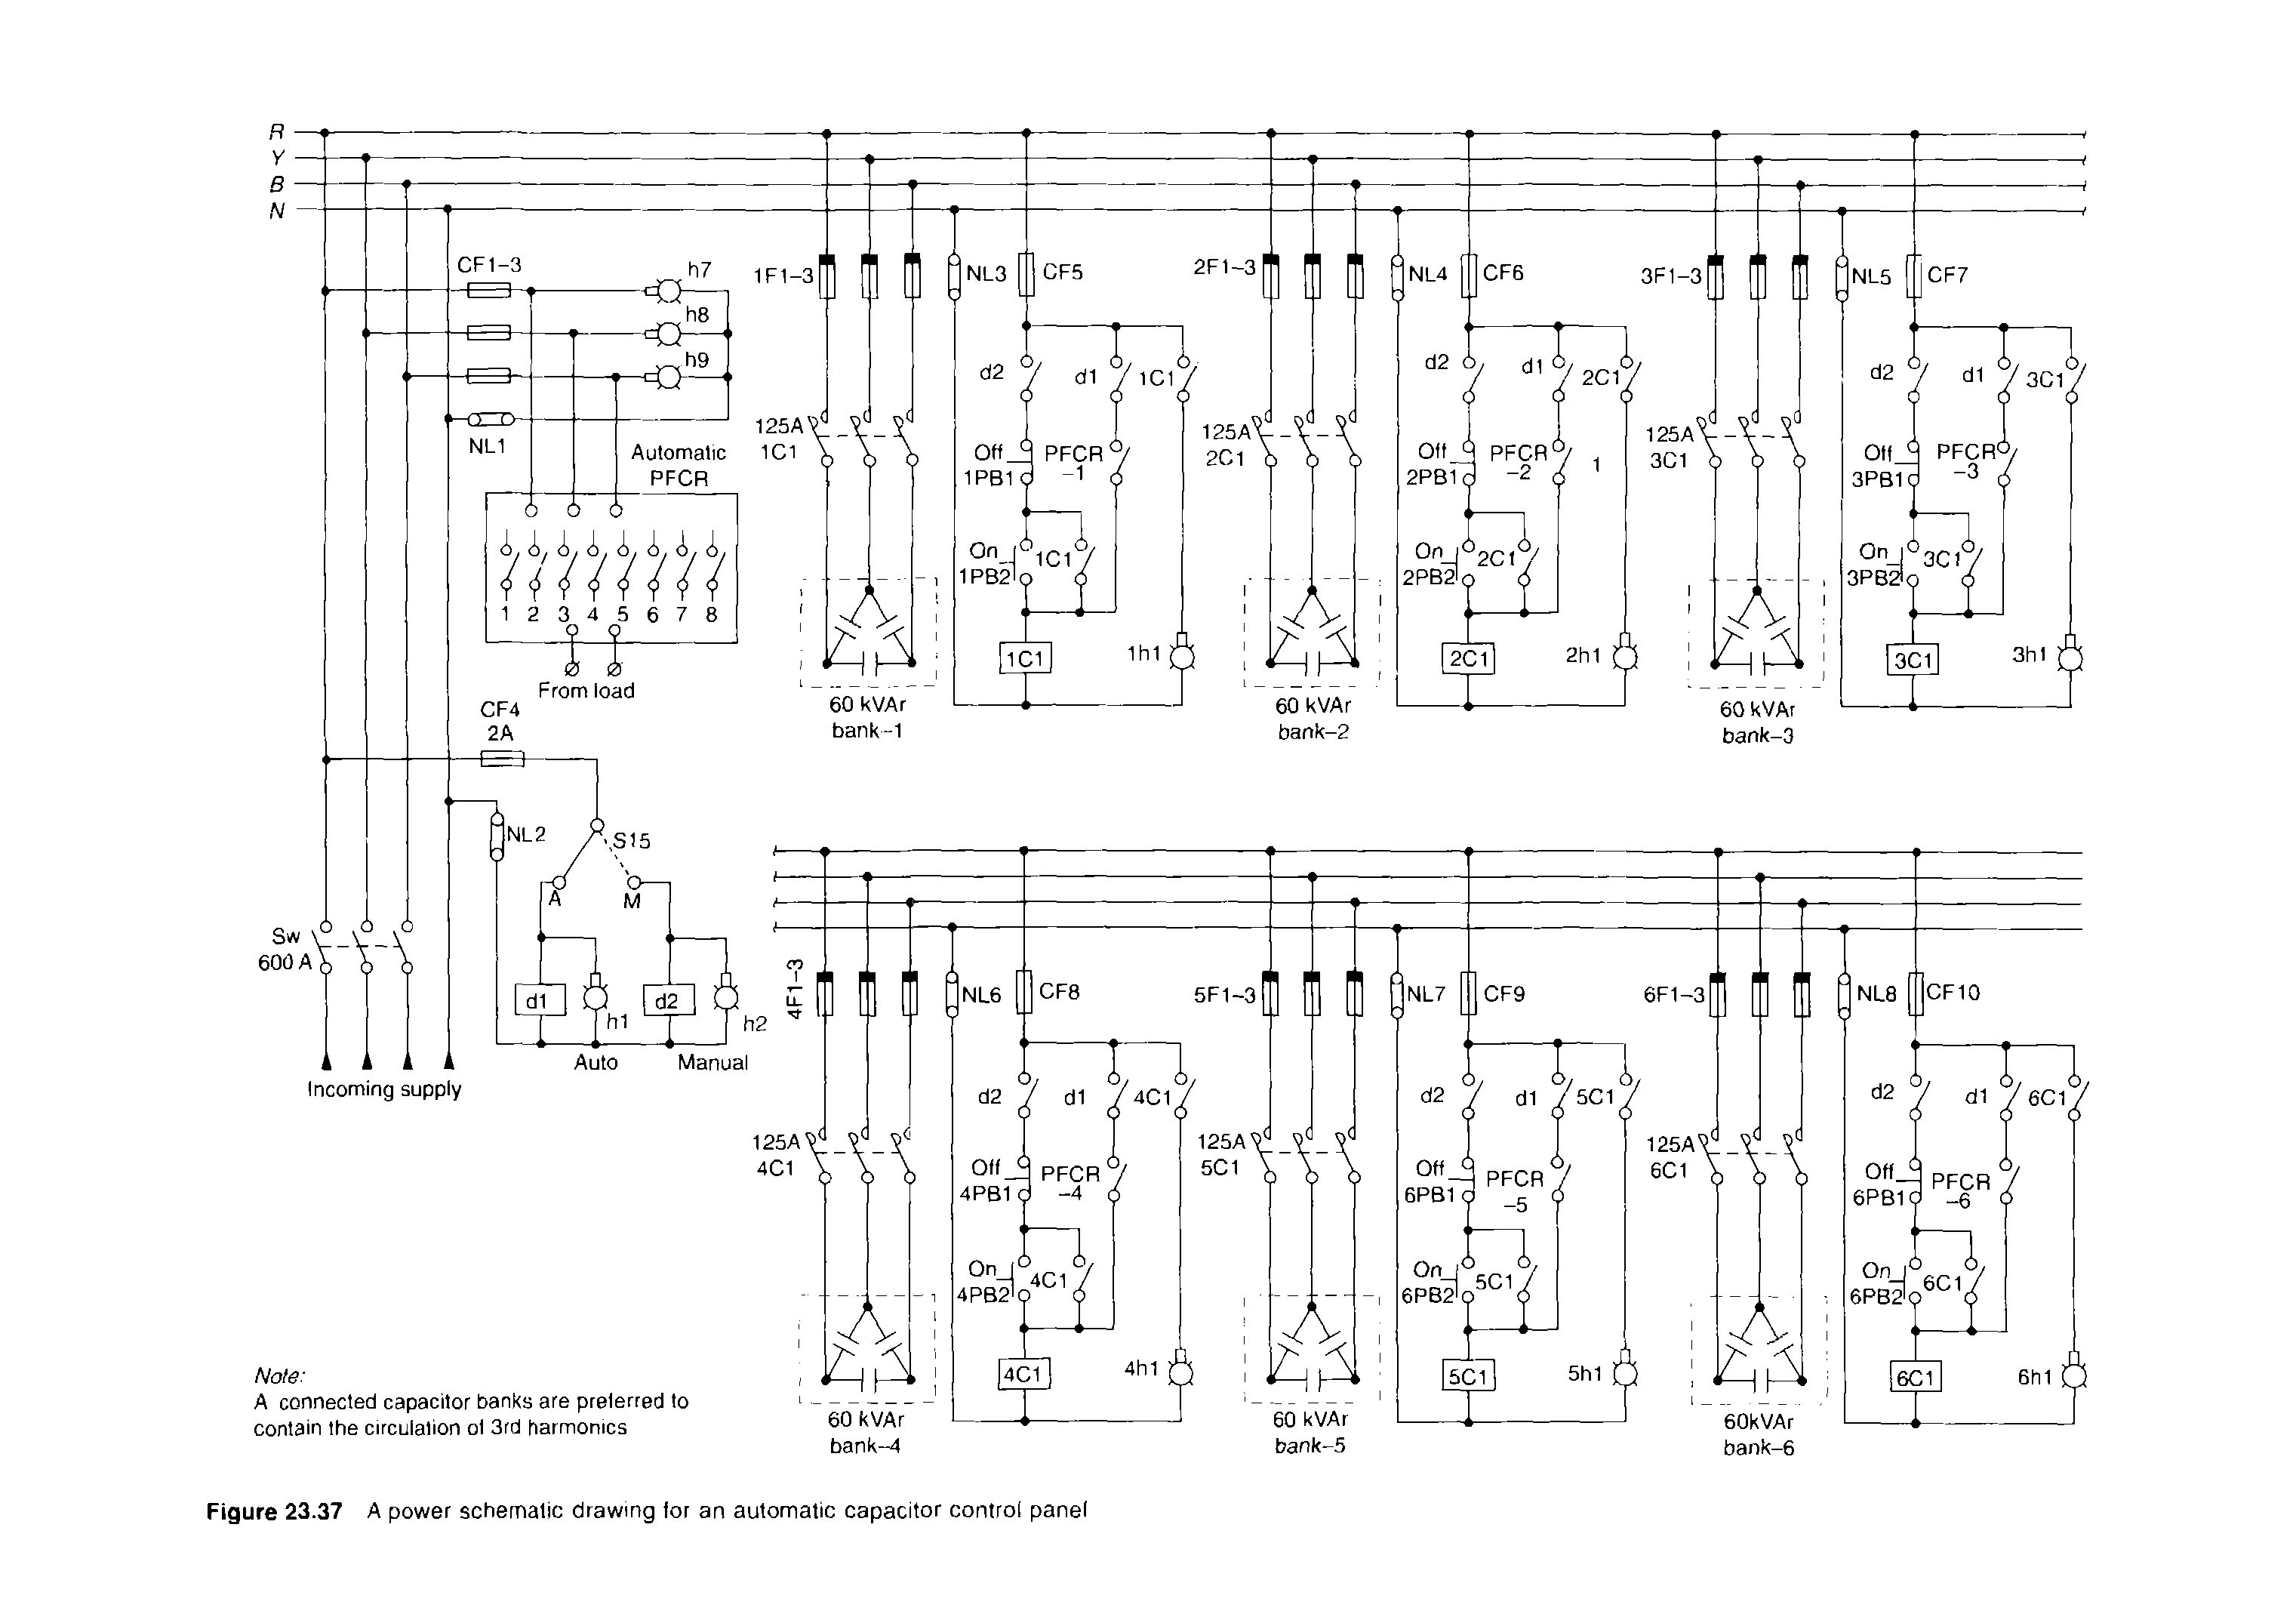 Figure 23.37 A power schematic drawing for an automatic capacitor control panel...